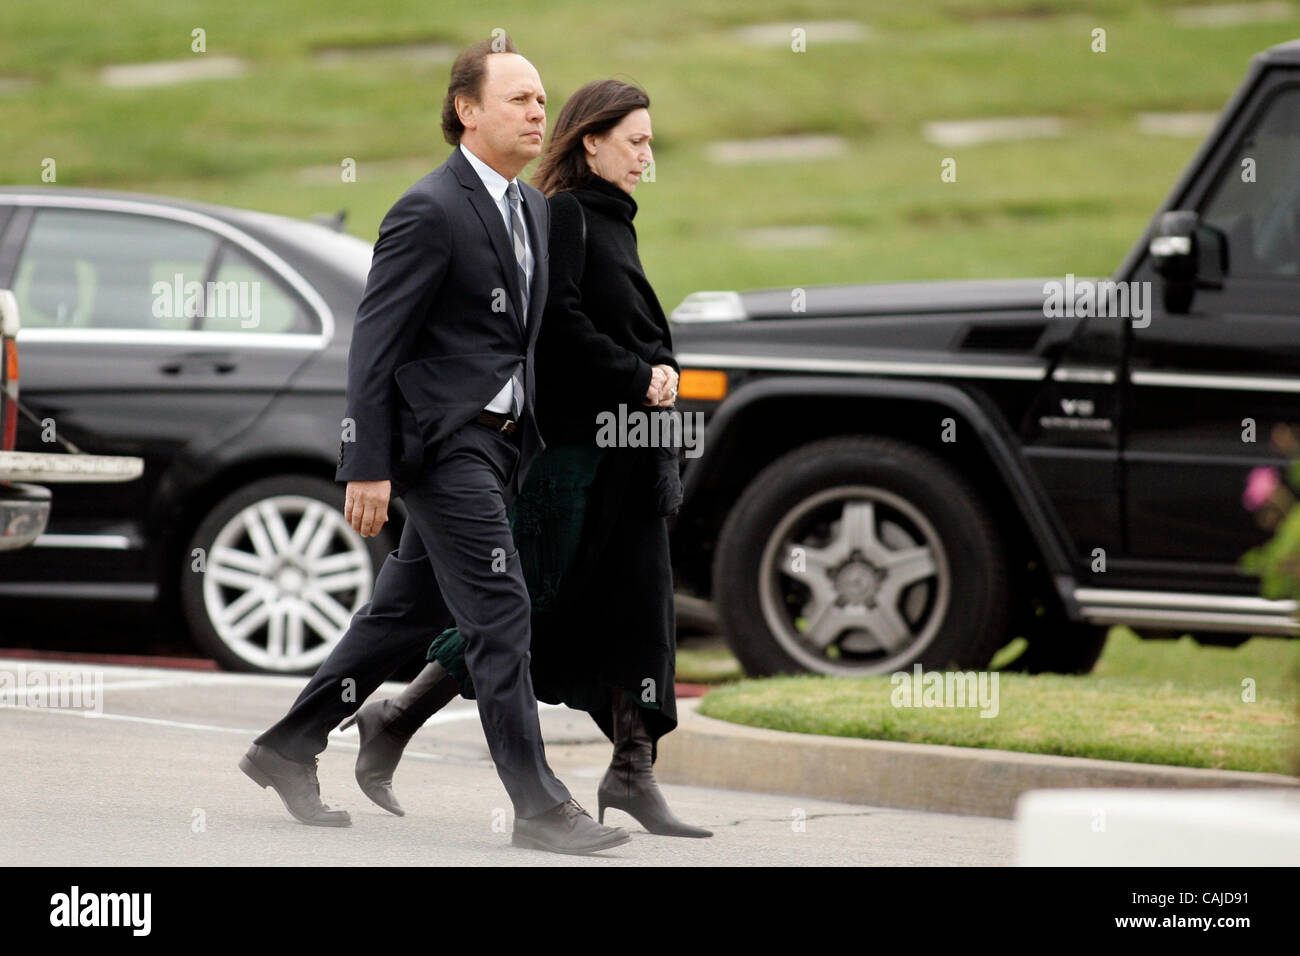 Jan 23, 2008 - Los Angeles, CA, USA - BILLY CRYSTAL and wife JANICE  GOLDFINGER, arrives at the funeral for Suzanne Pleshette who passed away  January 20, 2008 at her home. The